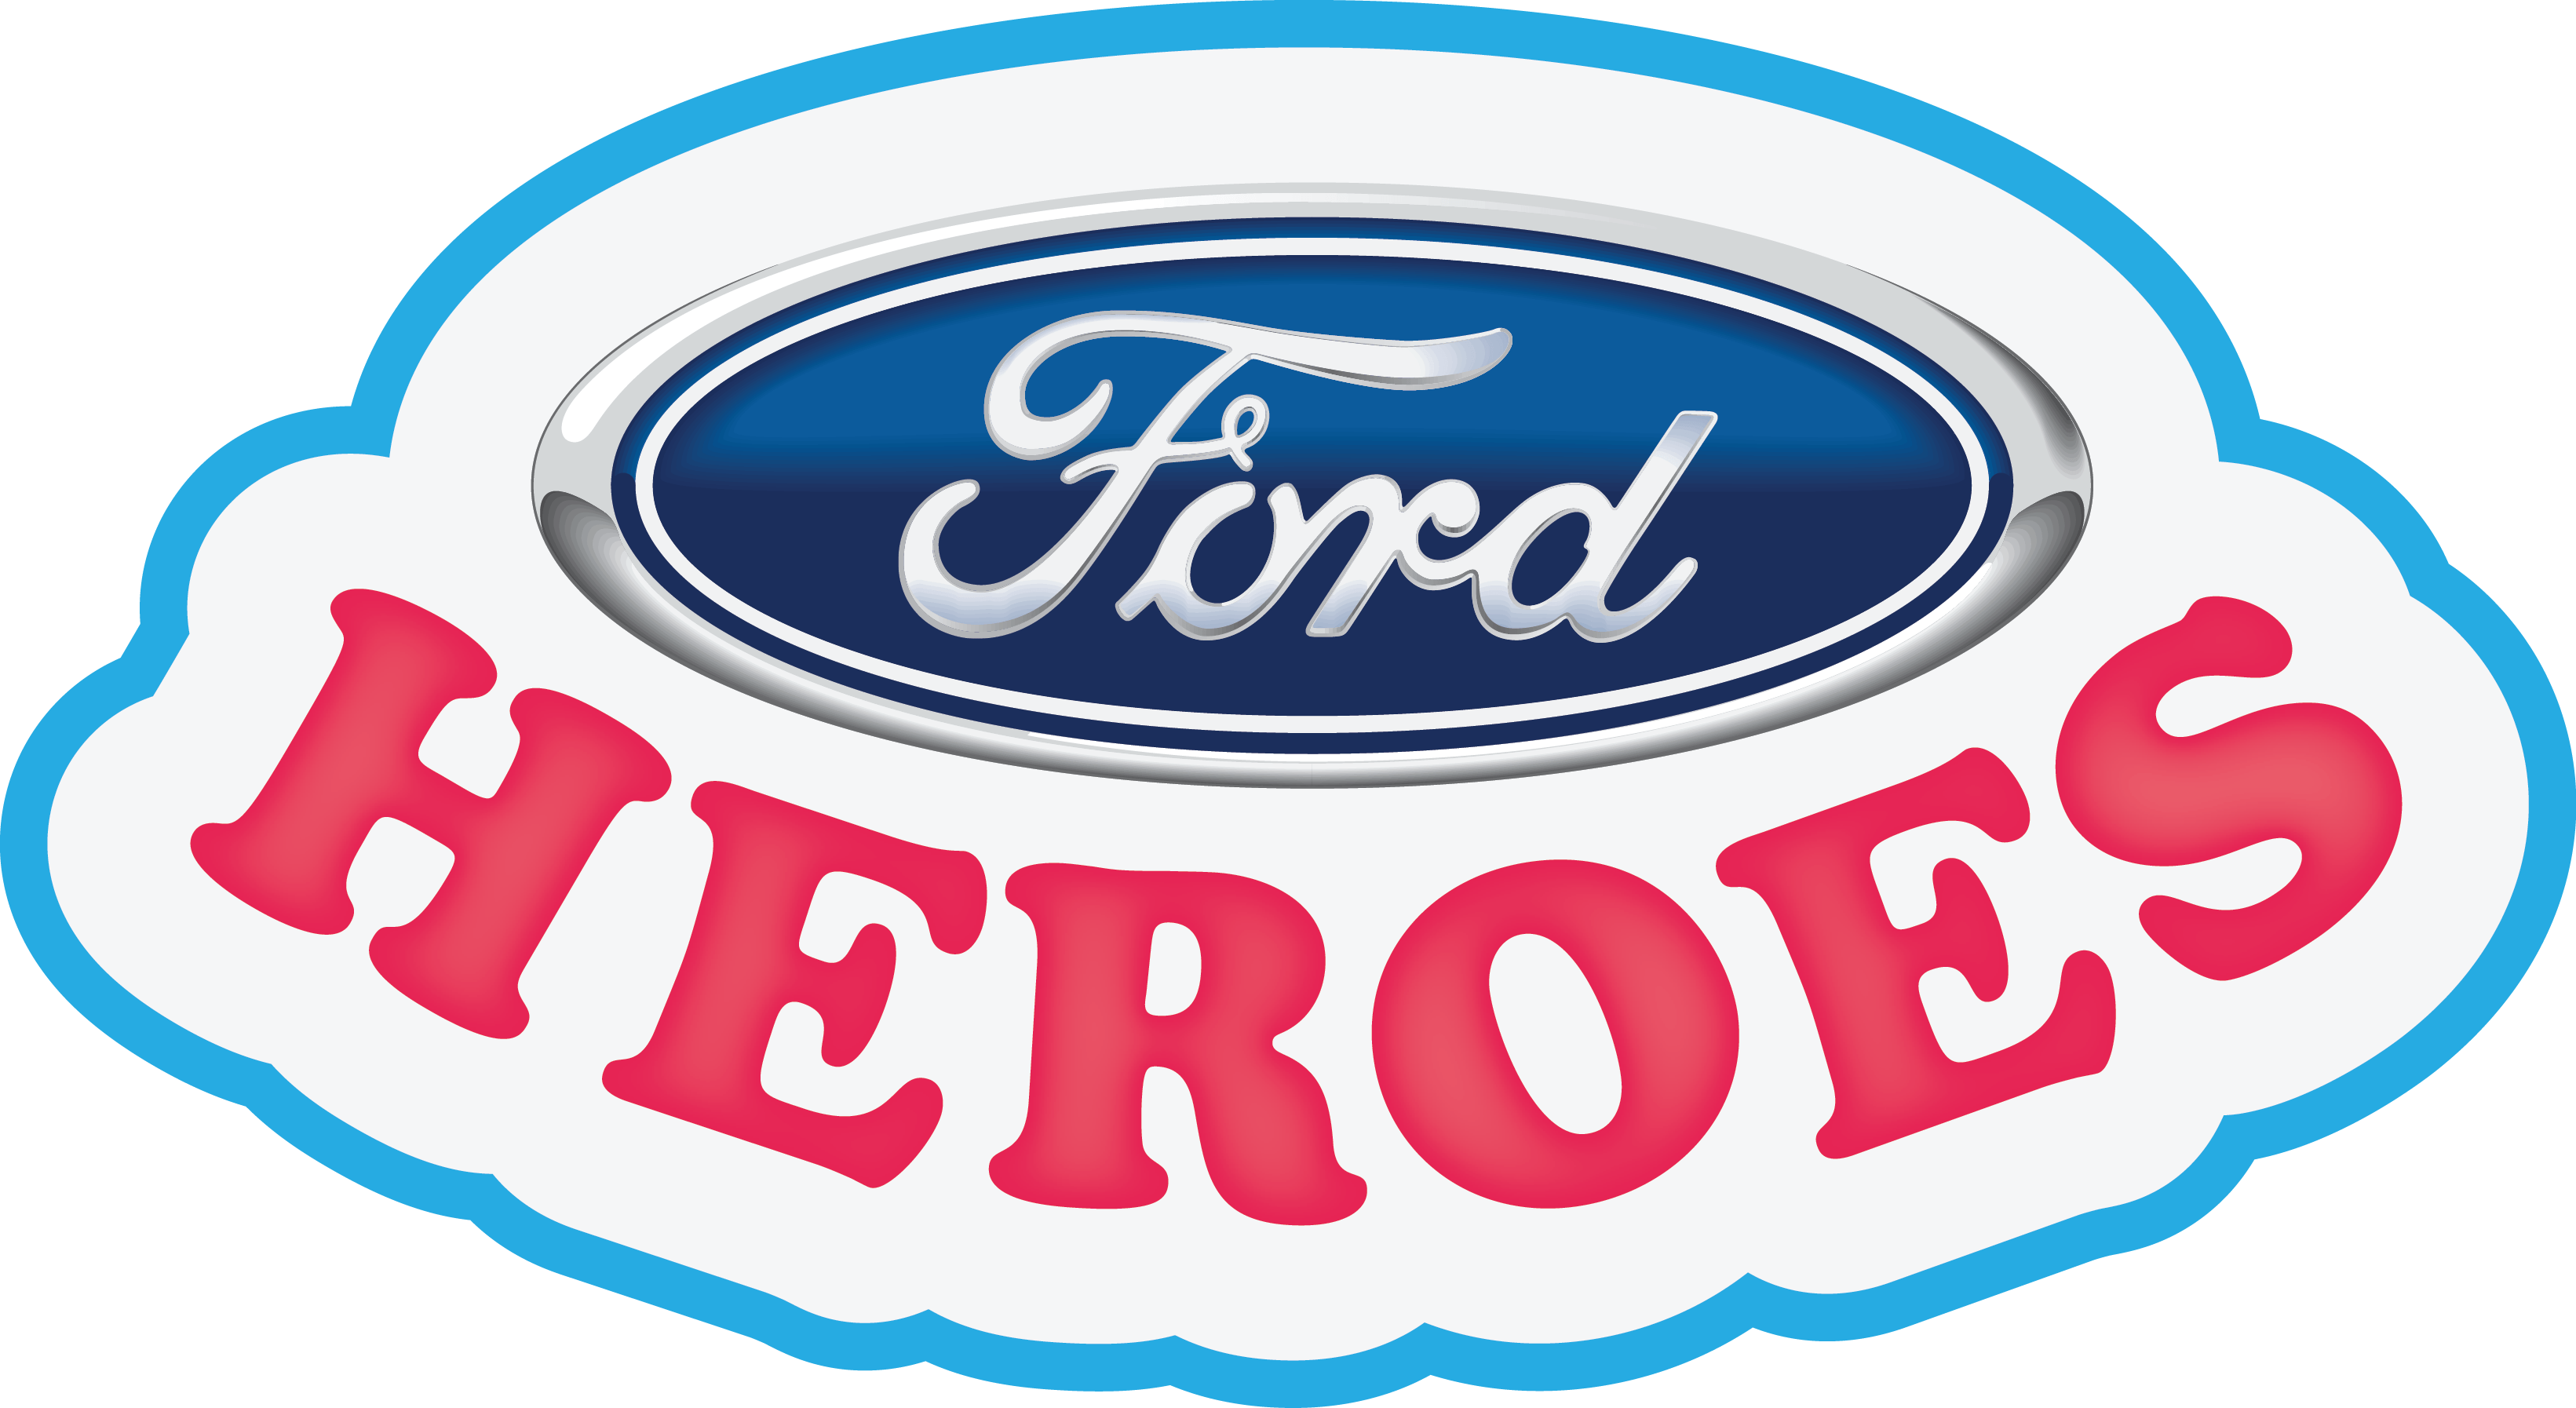 Cartoon Ford Logo - Ford Heroes' logo designed for Cartoon Ford concept for G. Ford